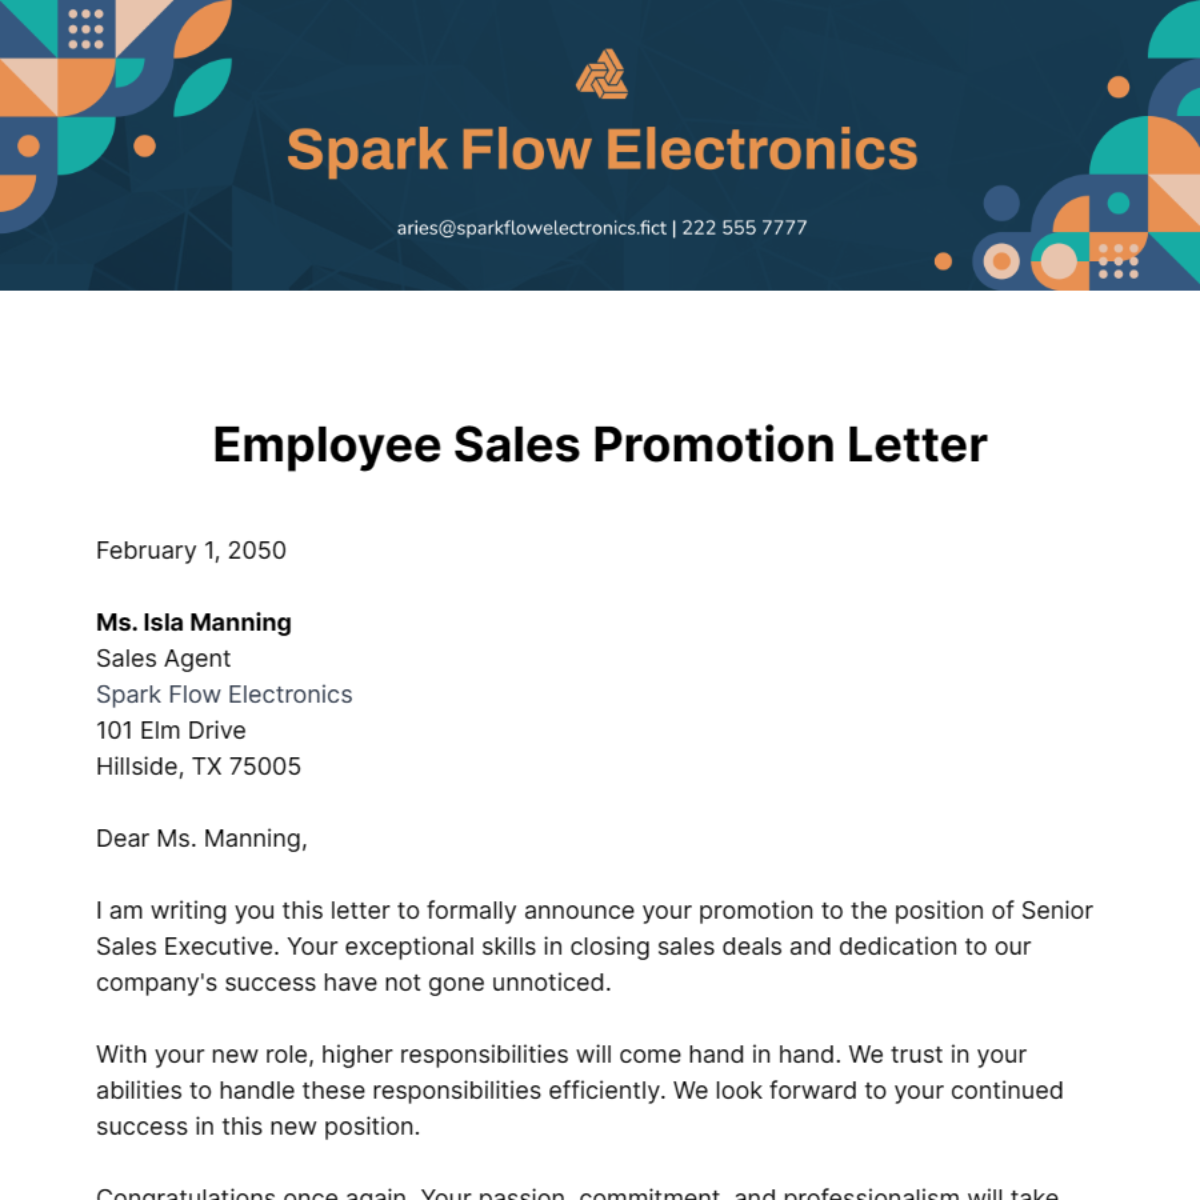 Employee Sales Promotion Letter Template